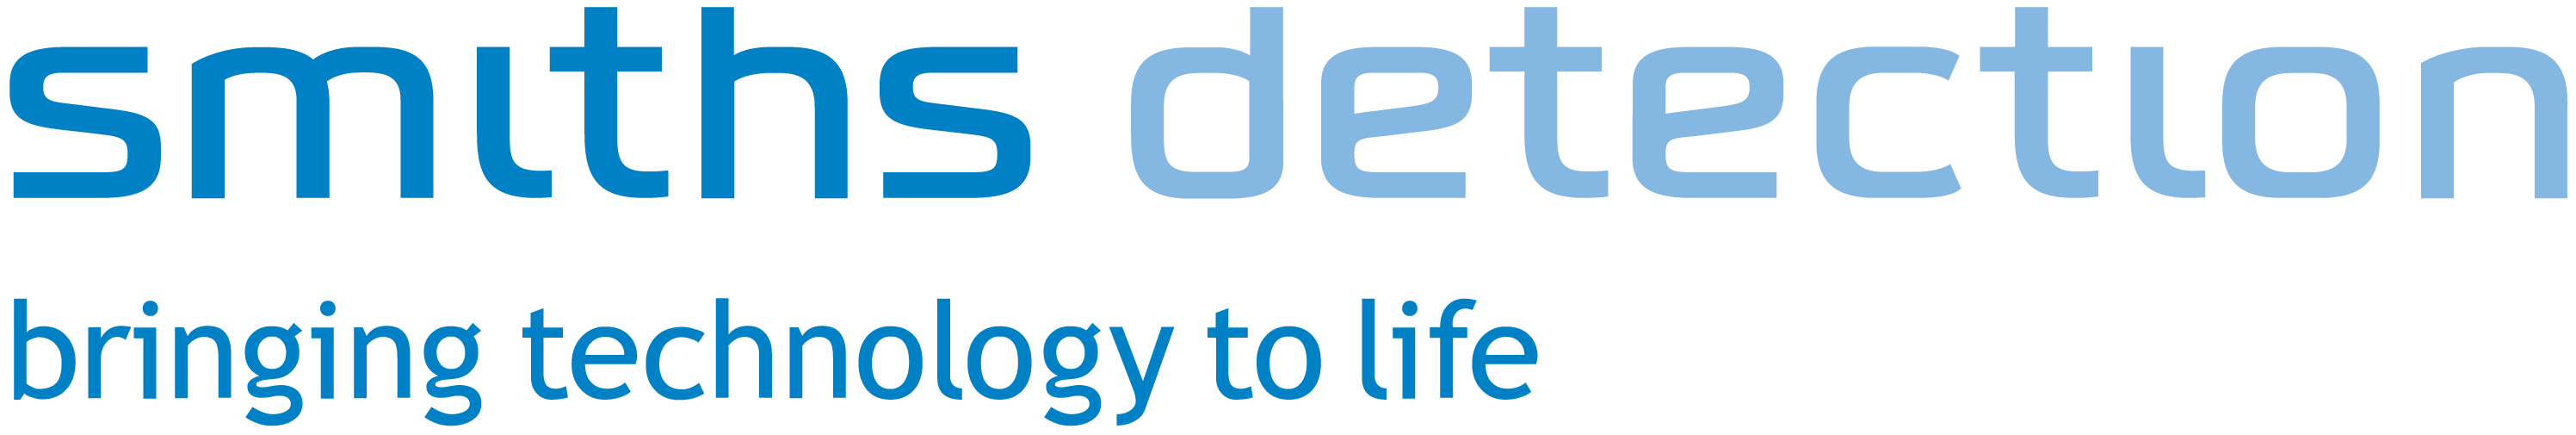 2017-06-30_SD logo blue with tagline-01.png